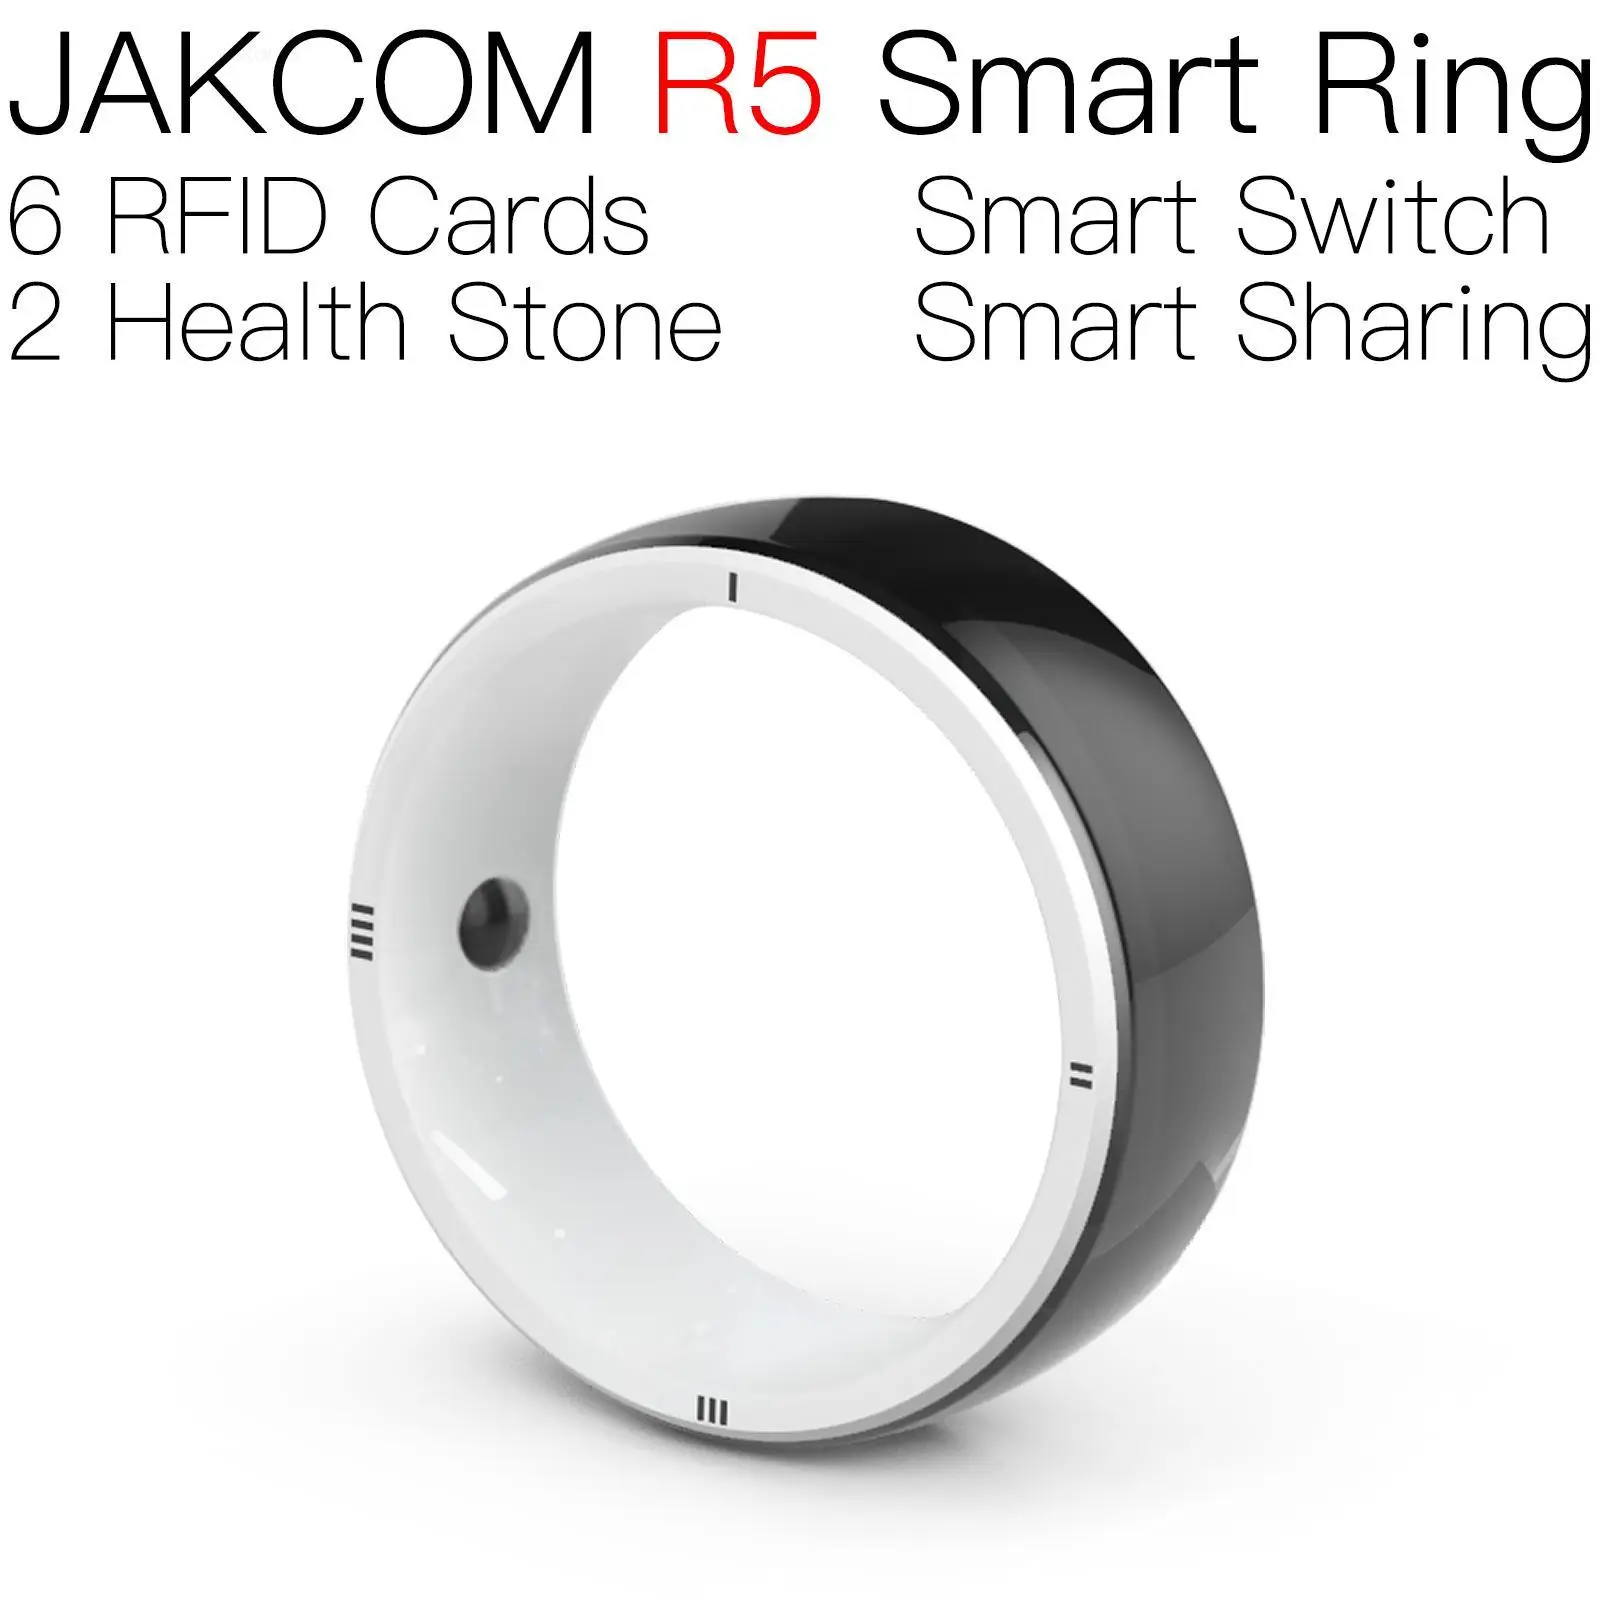 

JAKCOM R5 Smart Ring New arrival as rfid tag metal wristband printer laser blanks rewritable ring 125khz pps contact less nfc